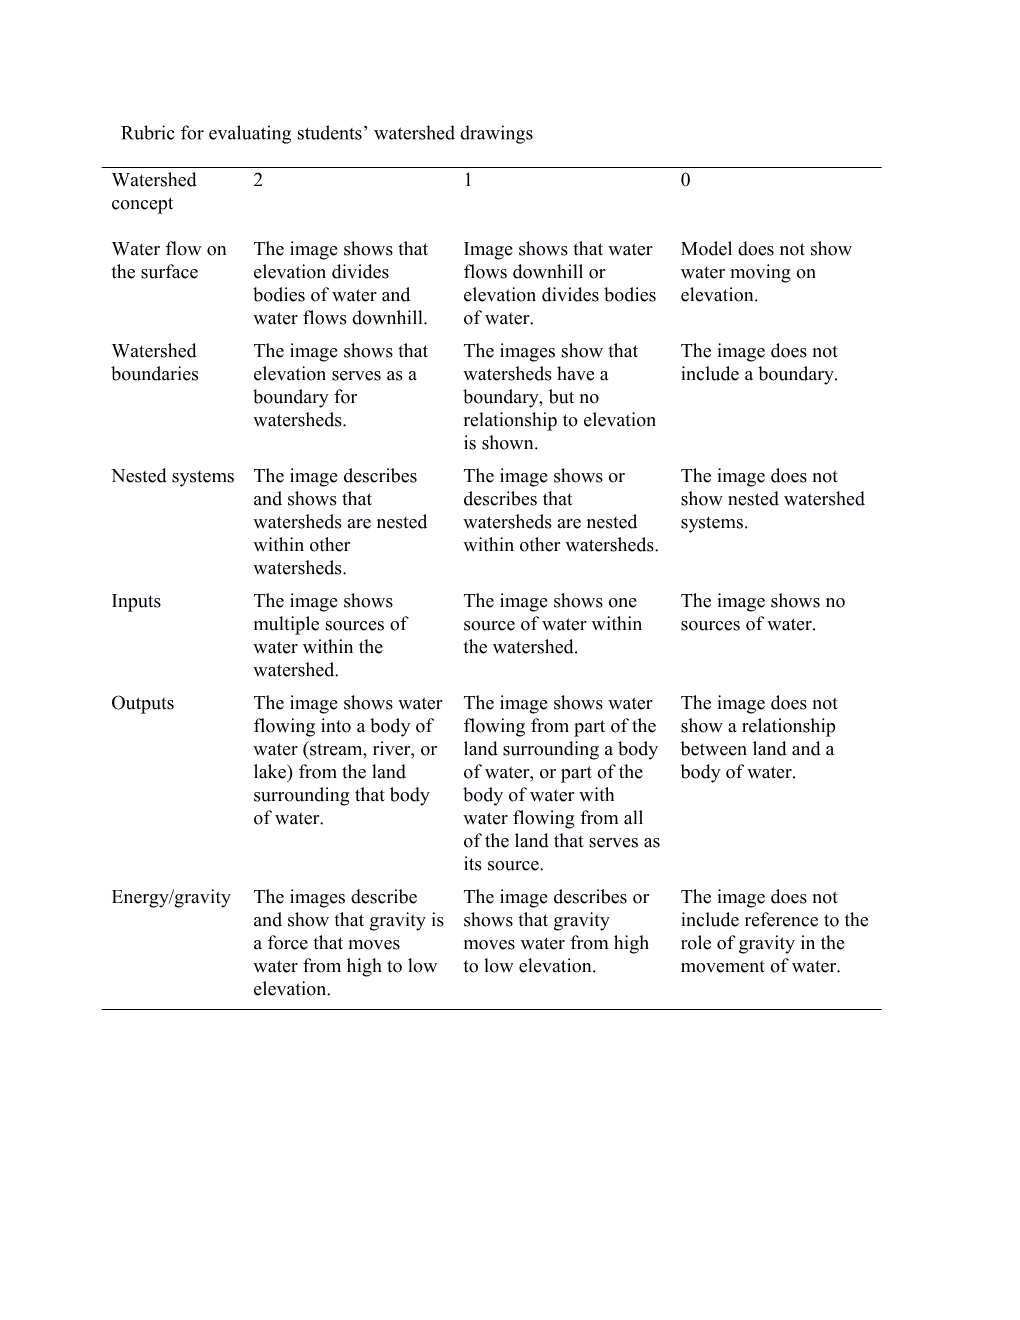 Rubric for Evaluating Students Watershed Drawings